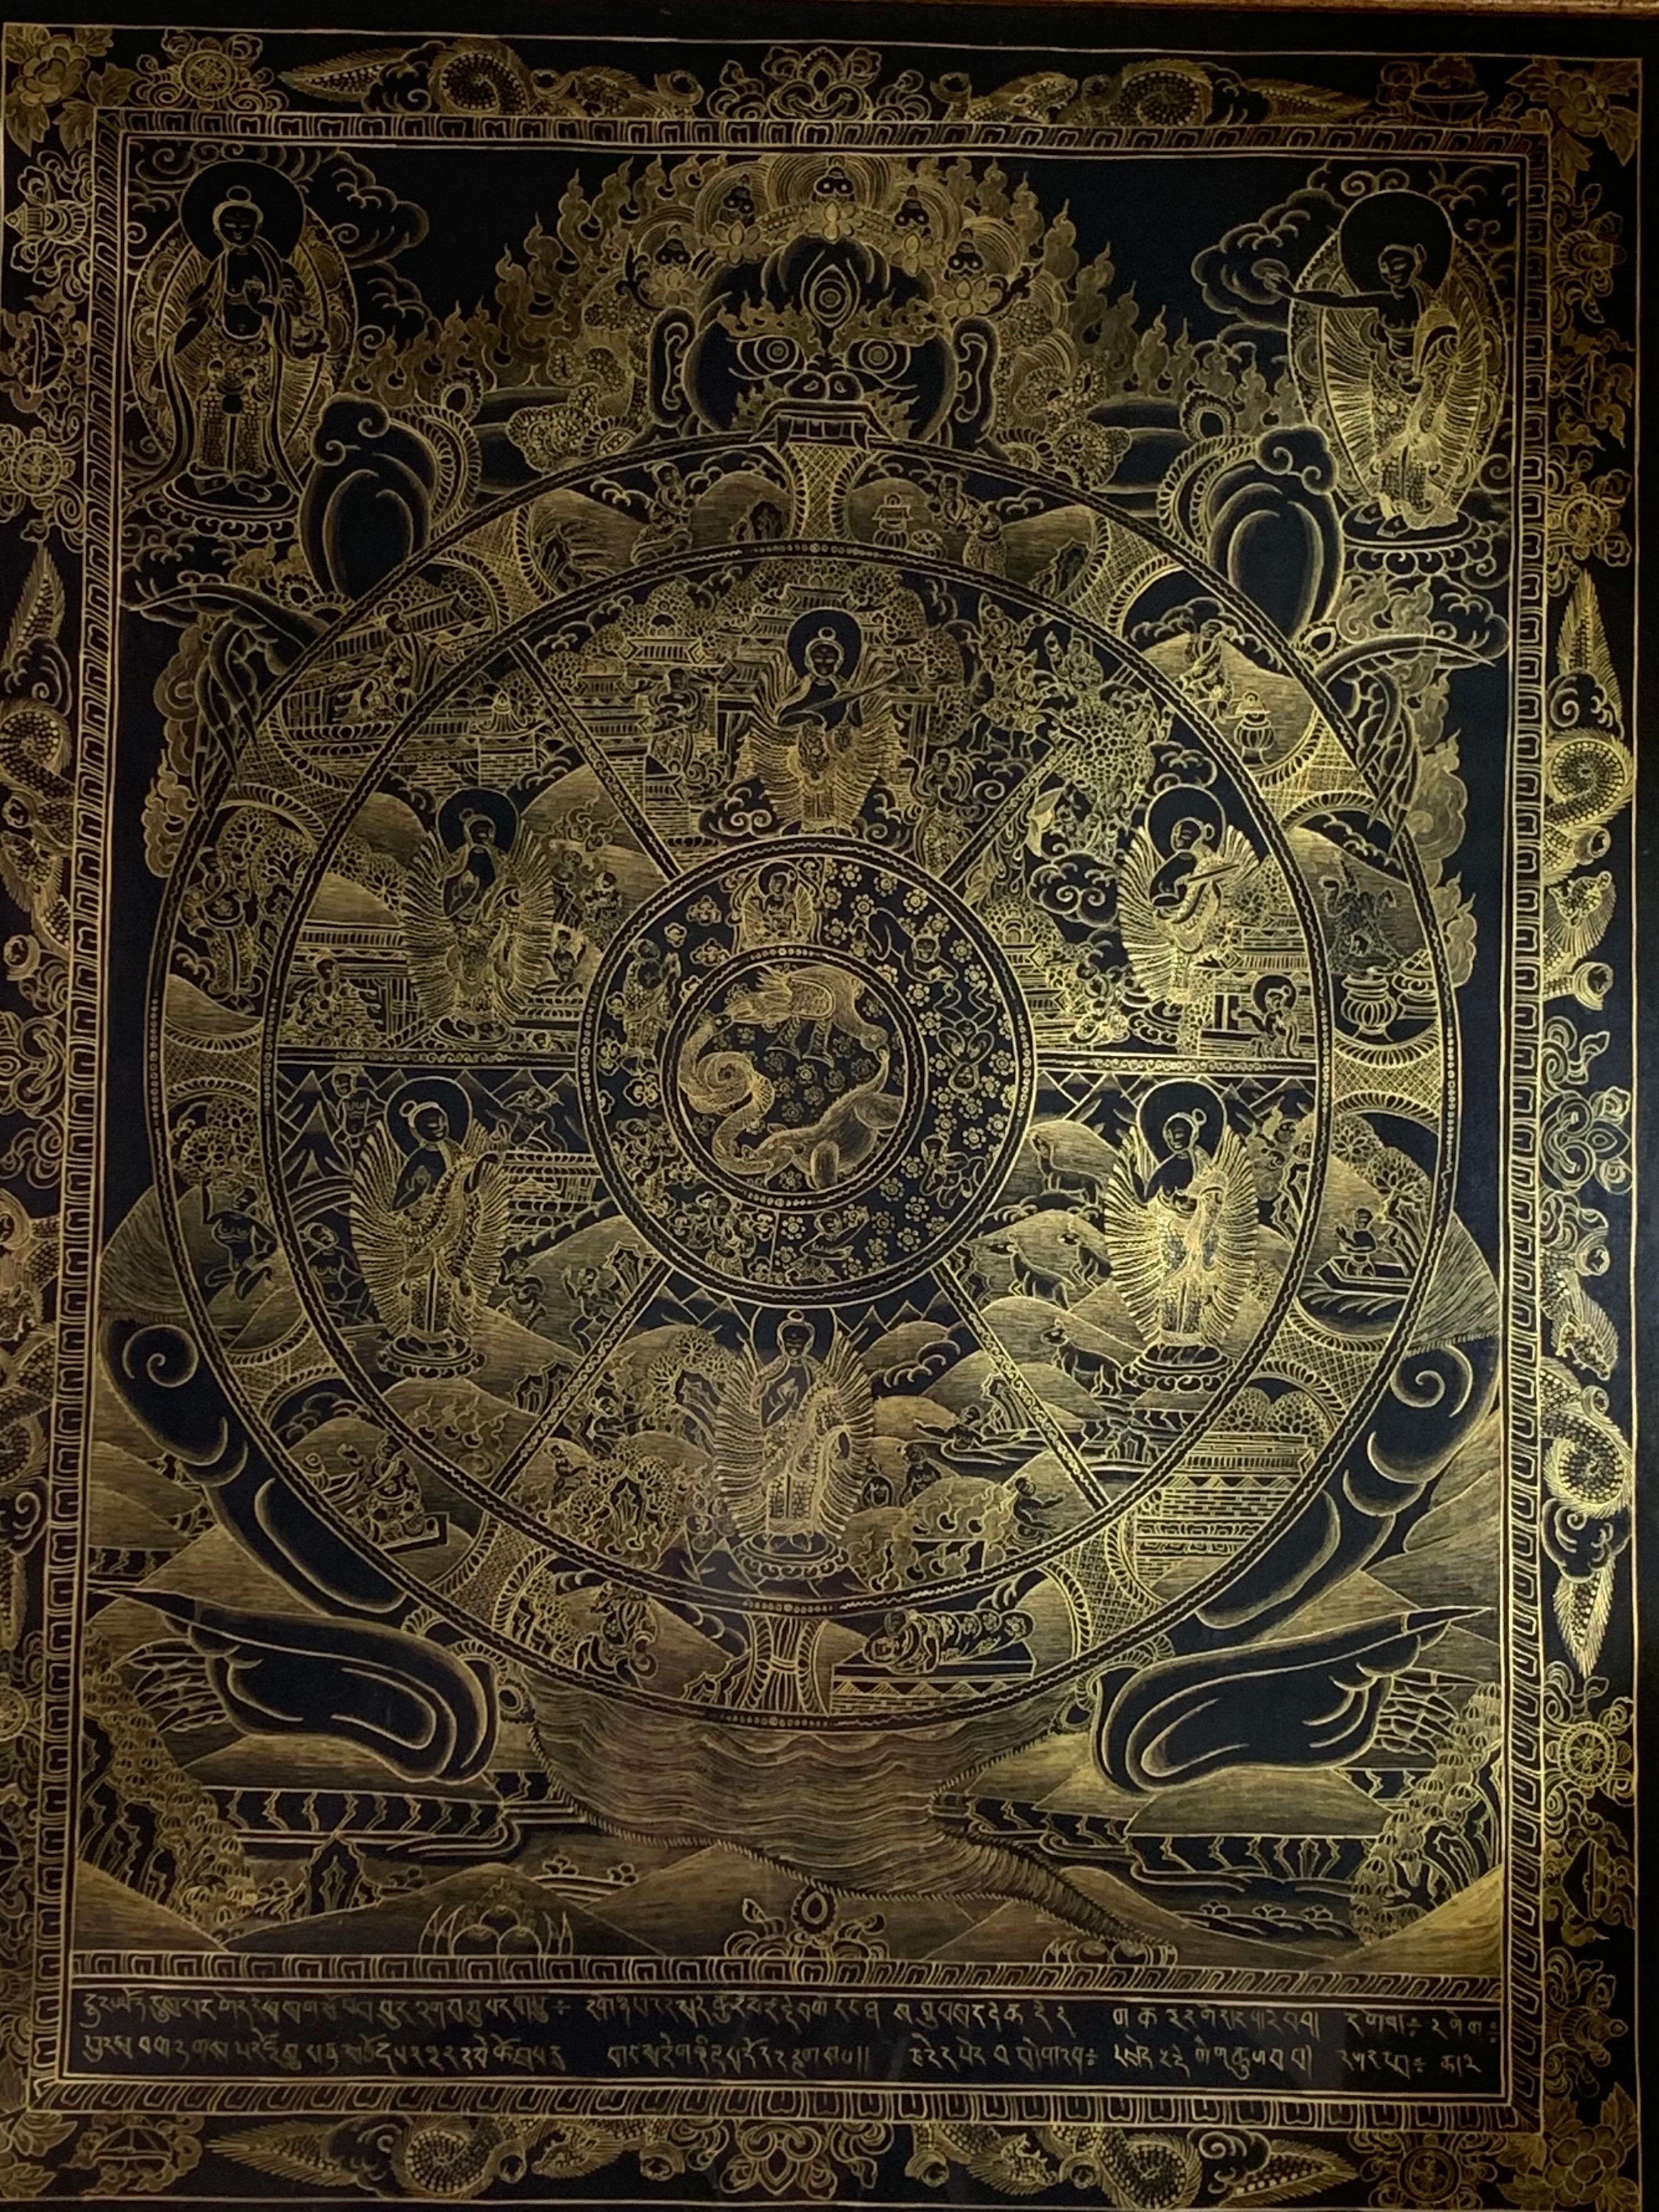 This wheel of life thangka is hand painted on canvas with 24k gold. The contrast of yellow gold on black with broad golden frame makes it a stunning art. The artist has painstakingly painted every detail work to make it a desirable piece of art.
The